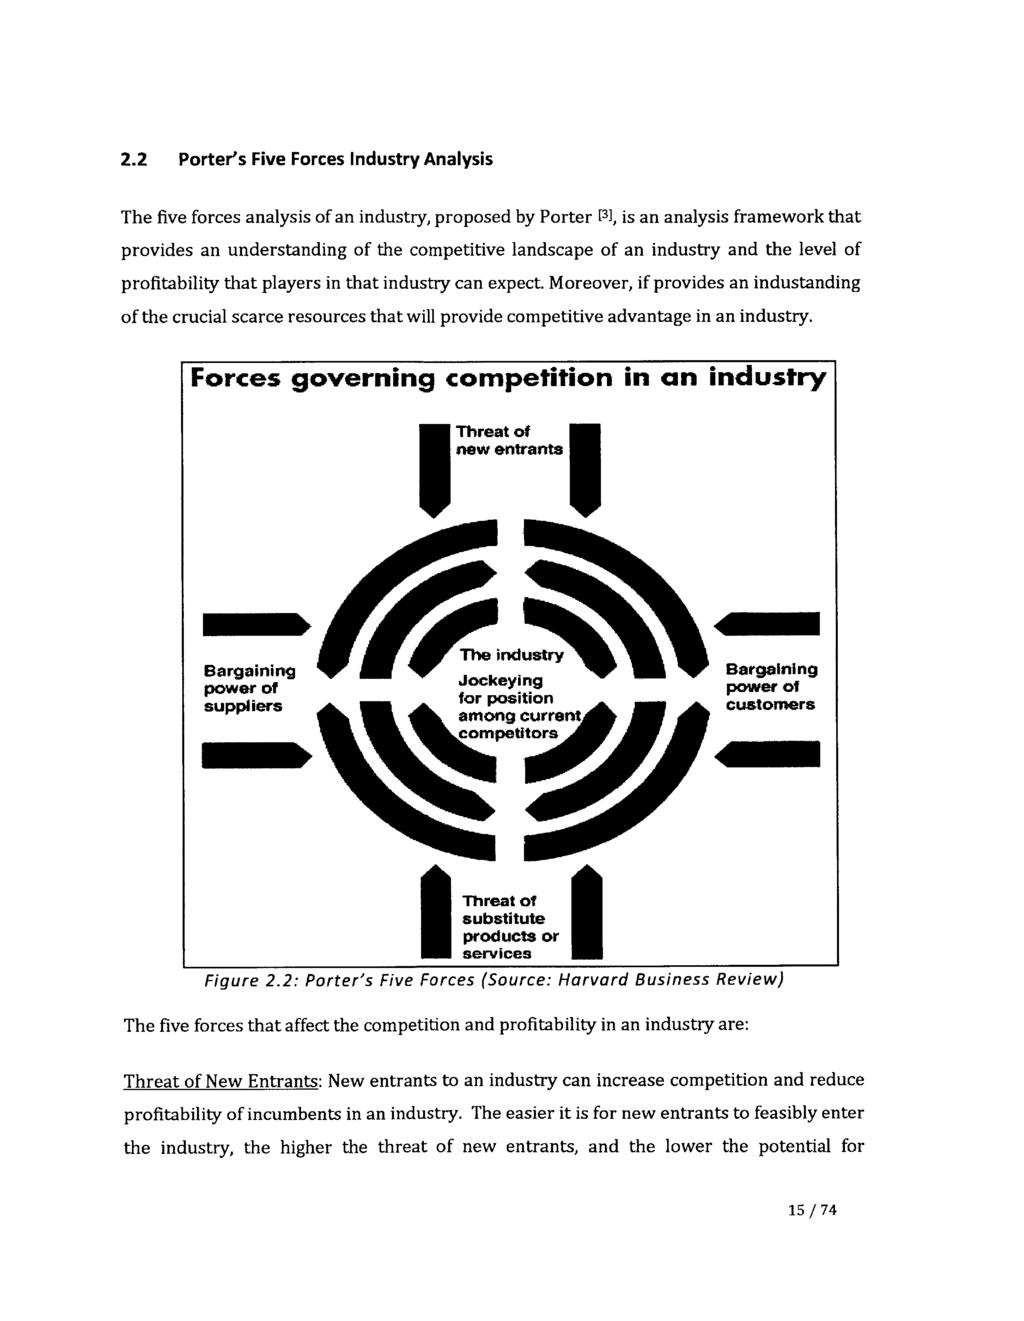 2.2 Porter's Five Forces Industry Analysis The five forces analysis of an industry, proposed by Porter [3], is an analysis framework that provides an understanding of the competitive landscape of an